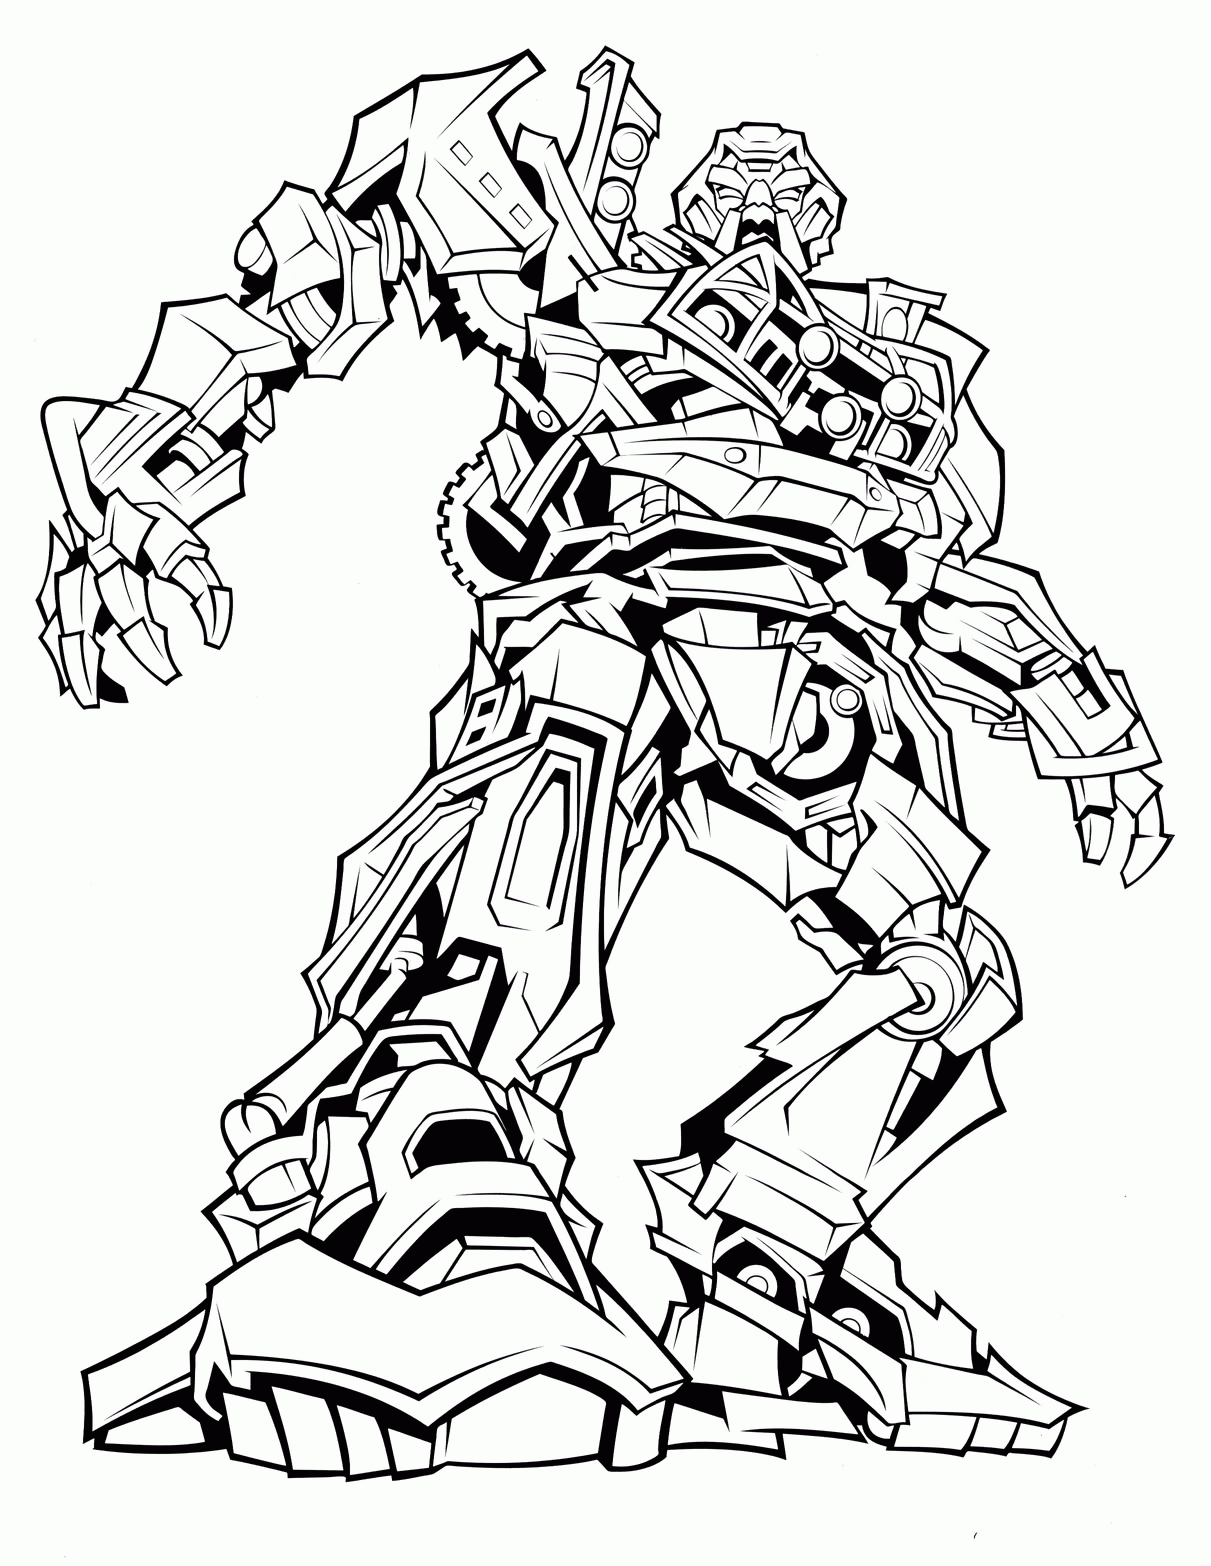 10 Pics of Transformers Coloring Pages Of Wolverine - Free ...